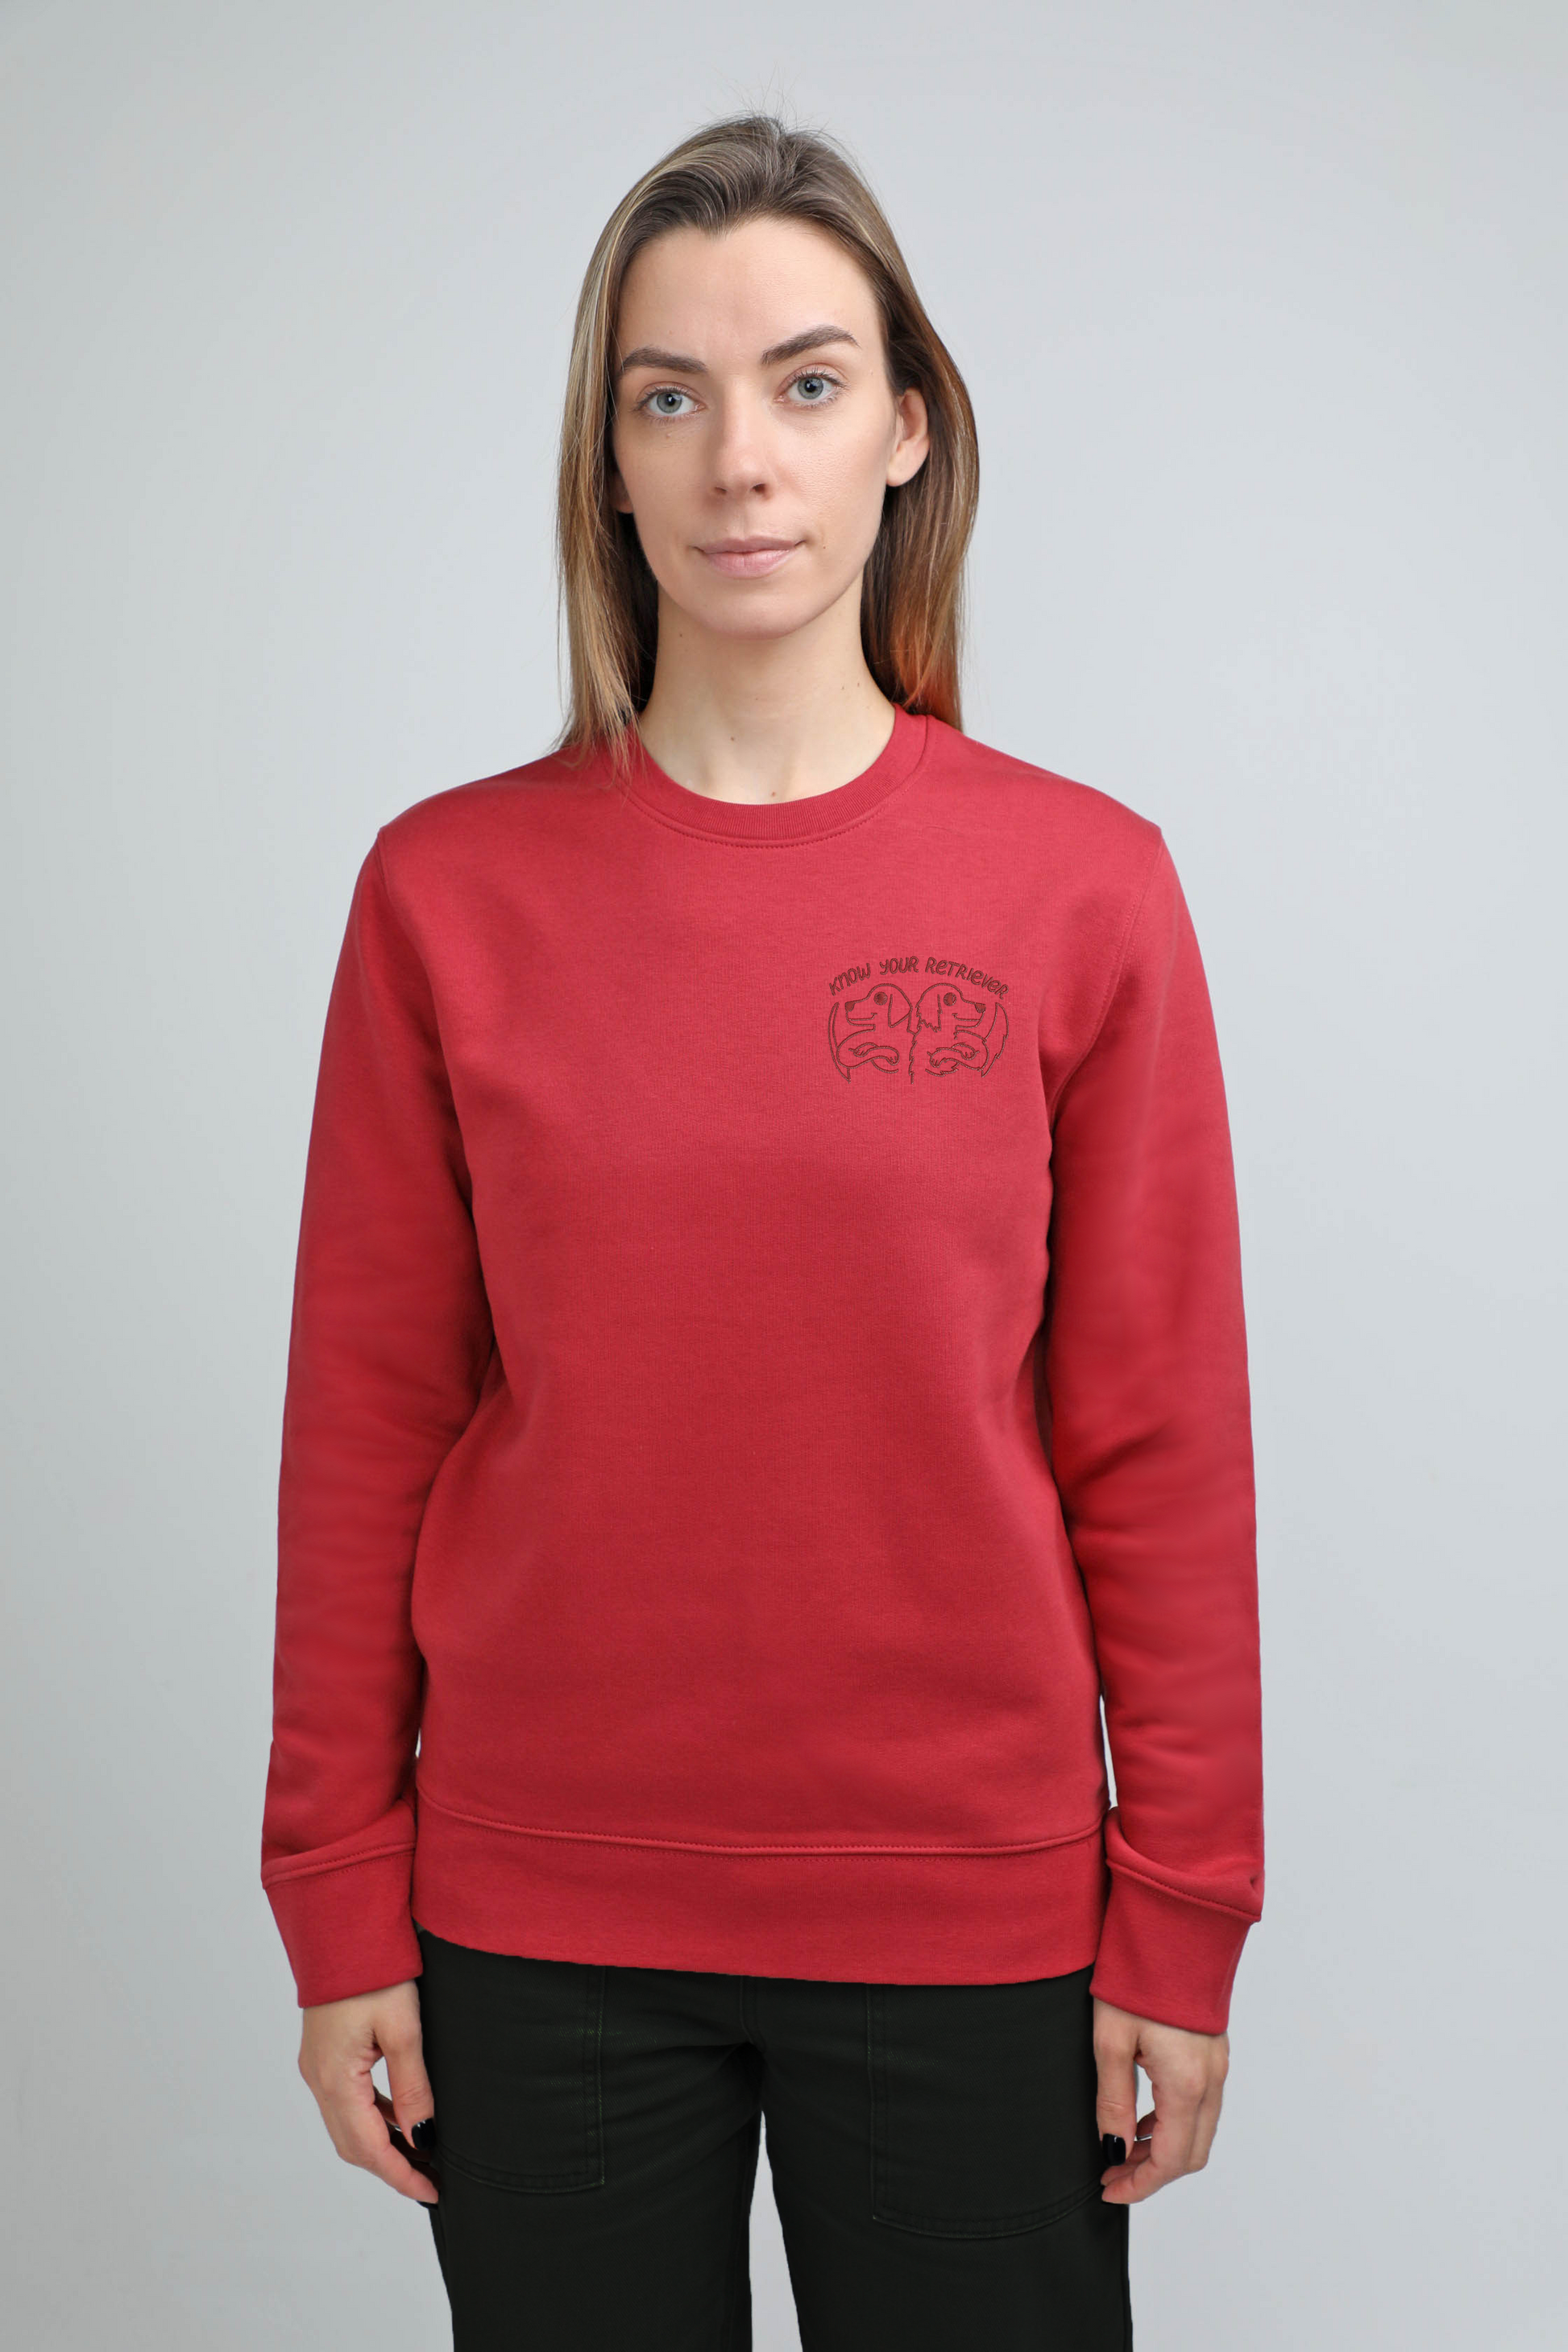 XL available only | Know your retriever | Crew neck sweatshirt with embroidered dogs. Regular fit | Unisex by My Wild Other